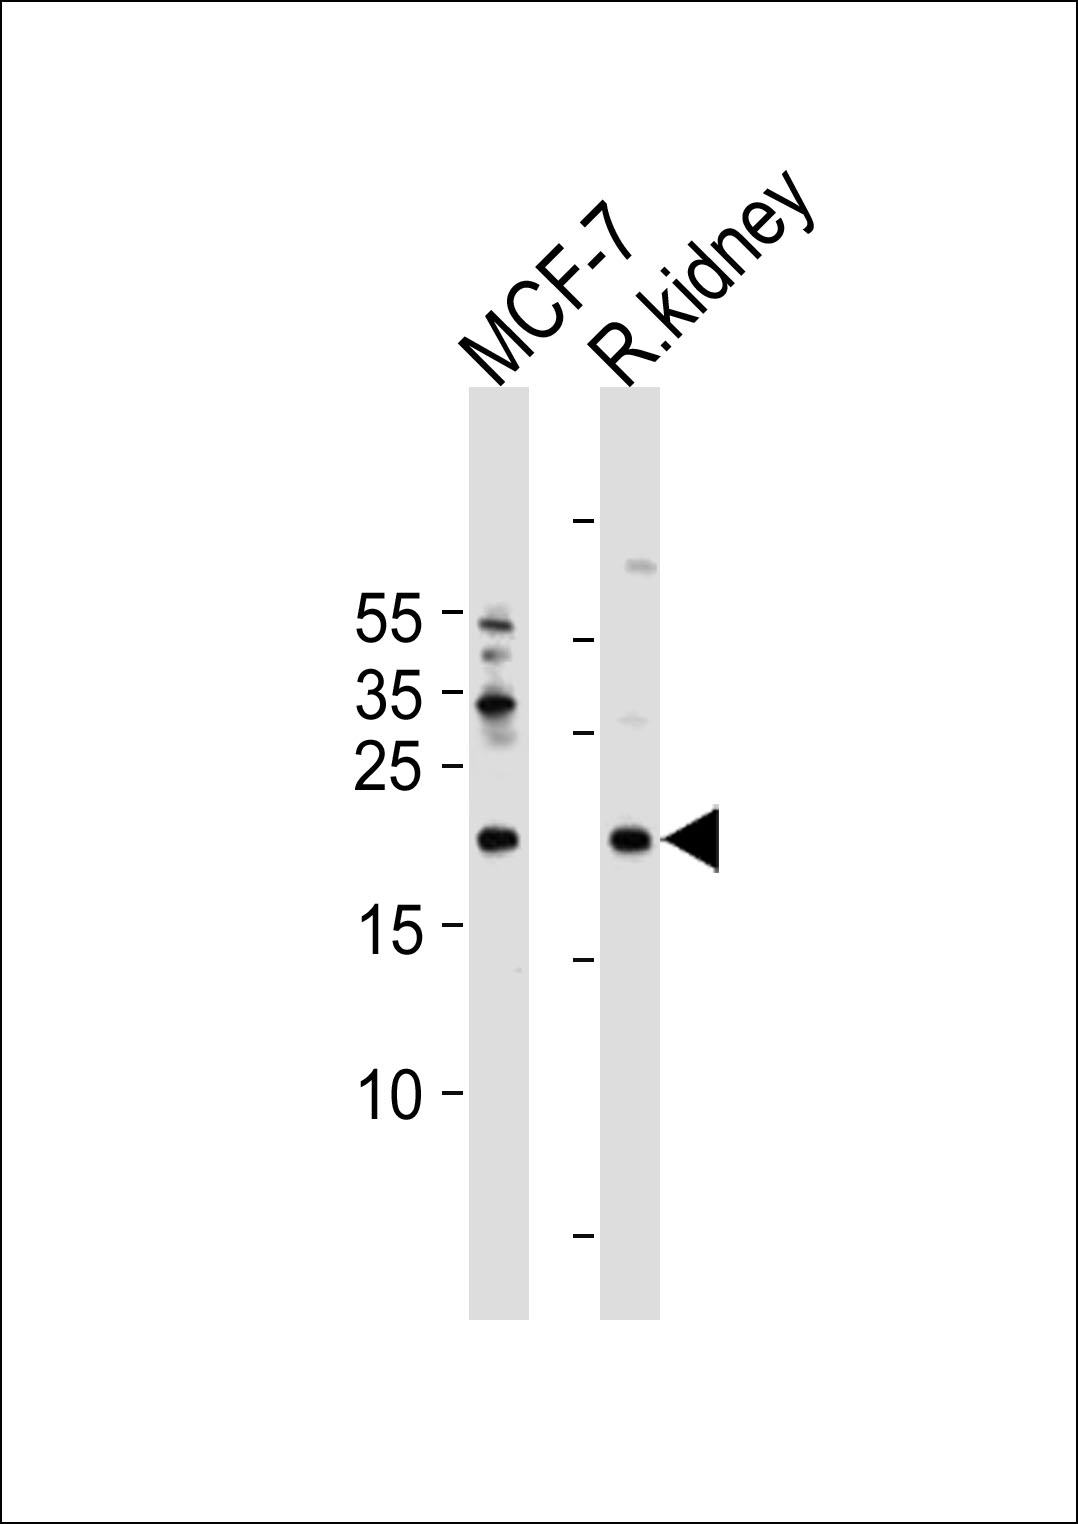 APRT Antibody (C-term) (Cat. #AP2893b) western blot analysis in MCF-7 cell line and rat kidney tissue lysates (35ug/lane).This demonstrates the APRT antibody detected the APRT protein (arrow).